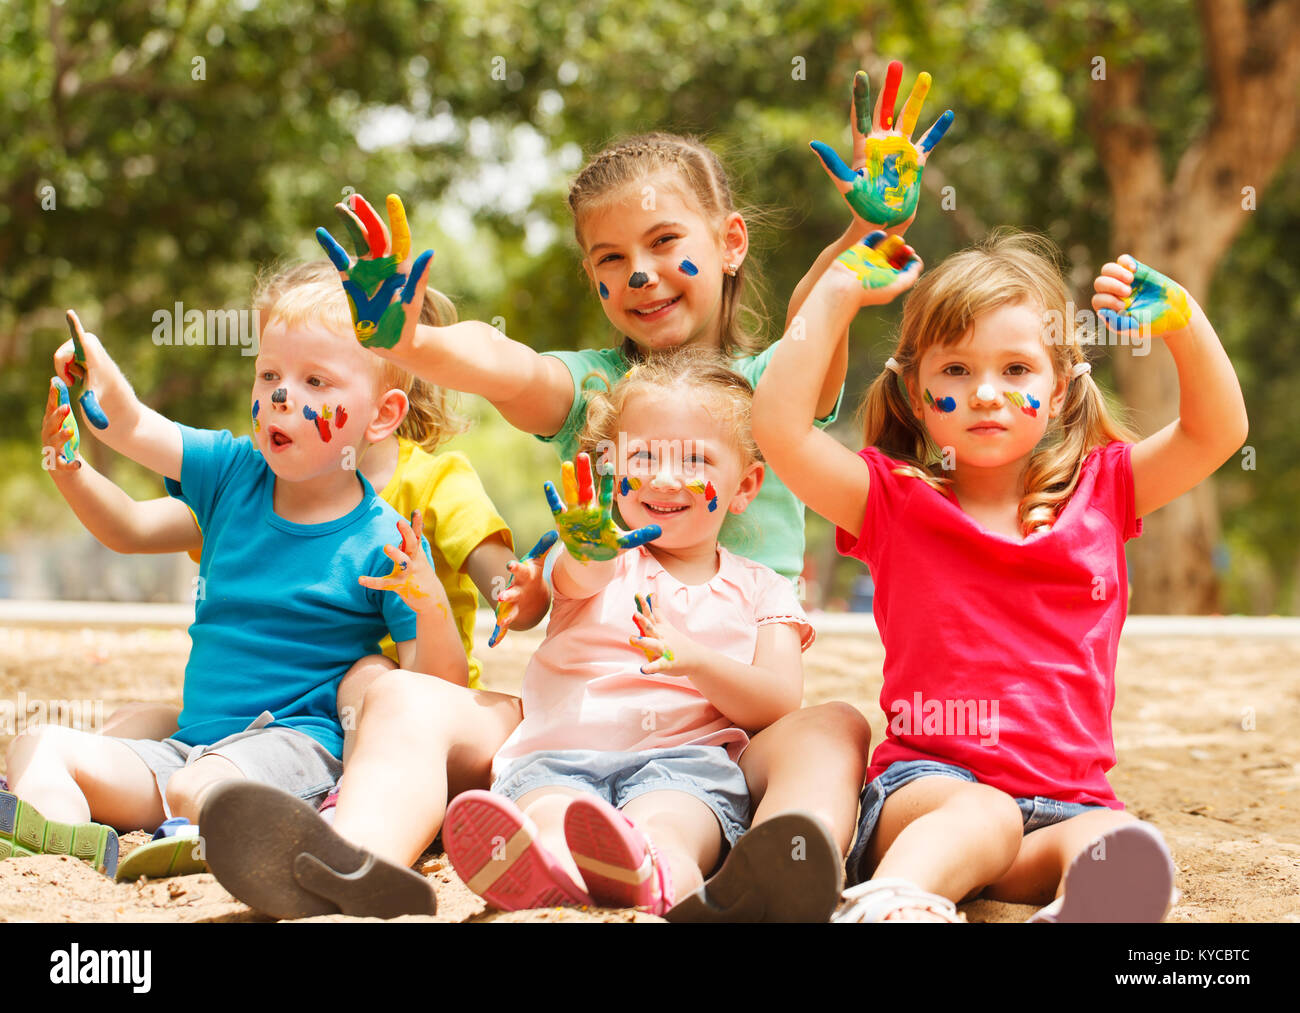 Five happy kids with hands covered in paint Stock Photo